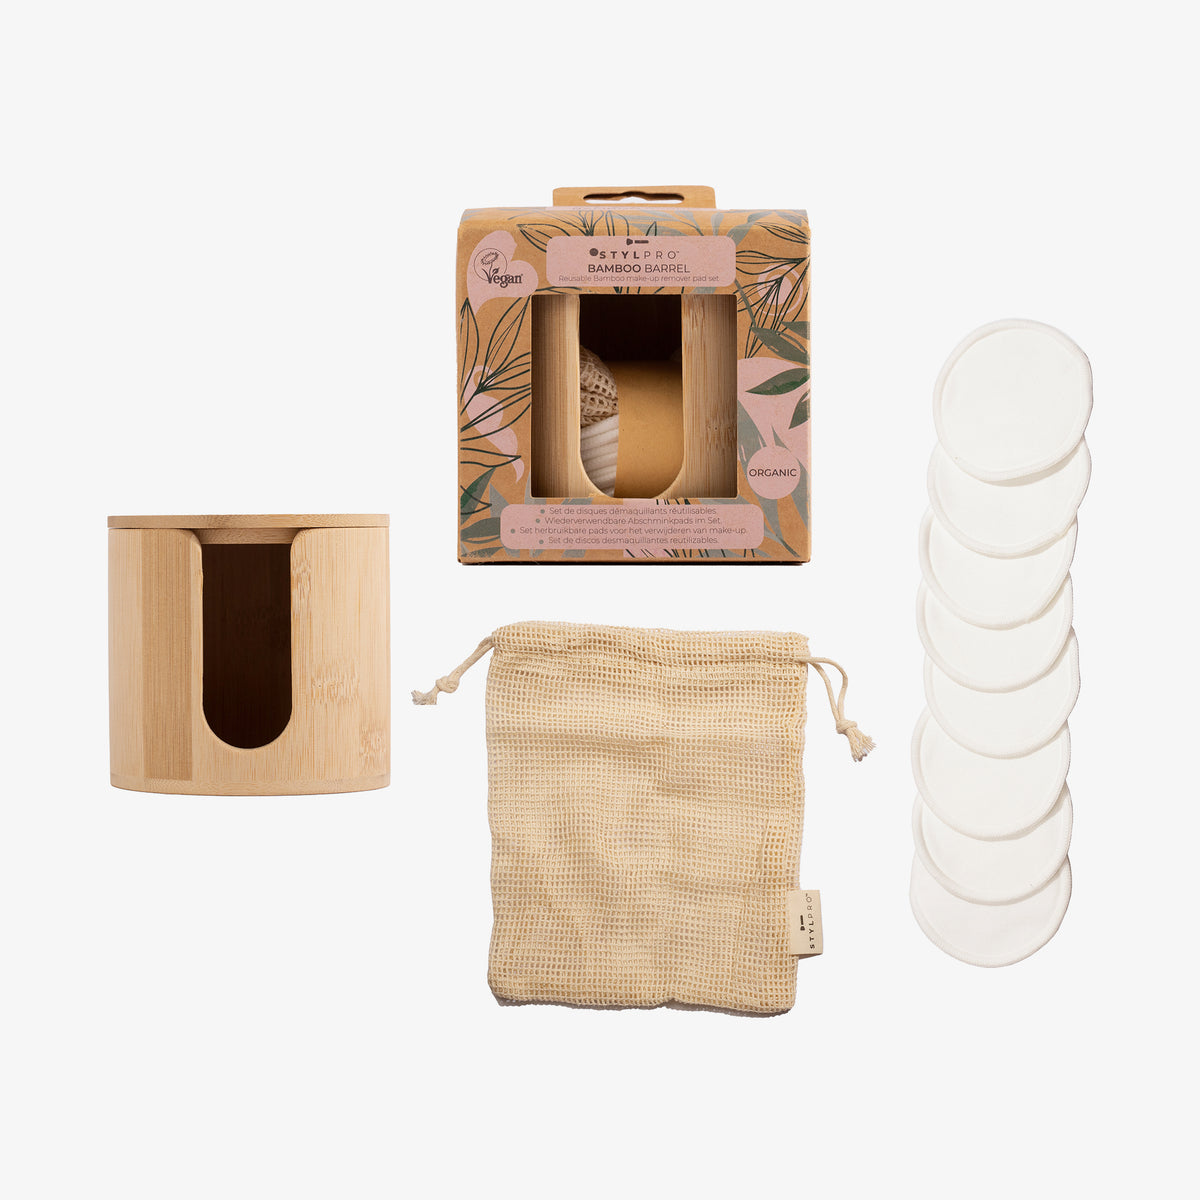 STYLPRO | Bamboo Barrel with 8 Pads & Wash Bag